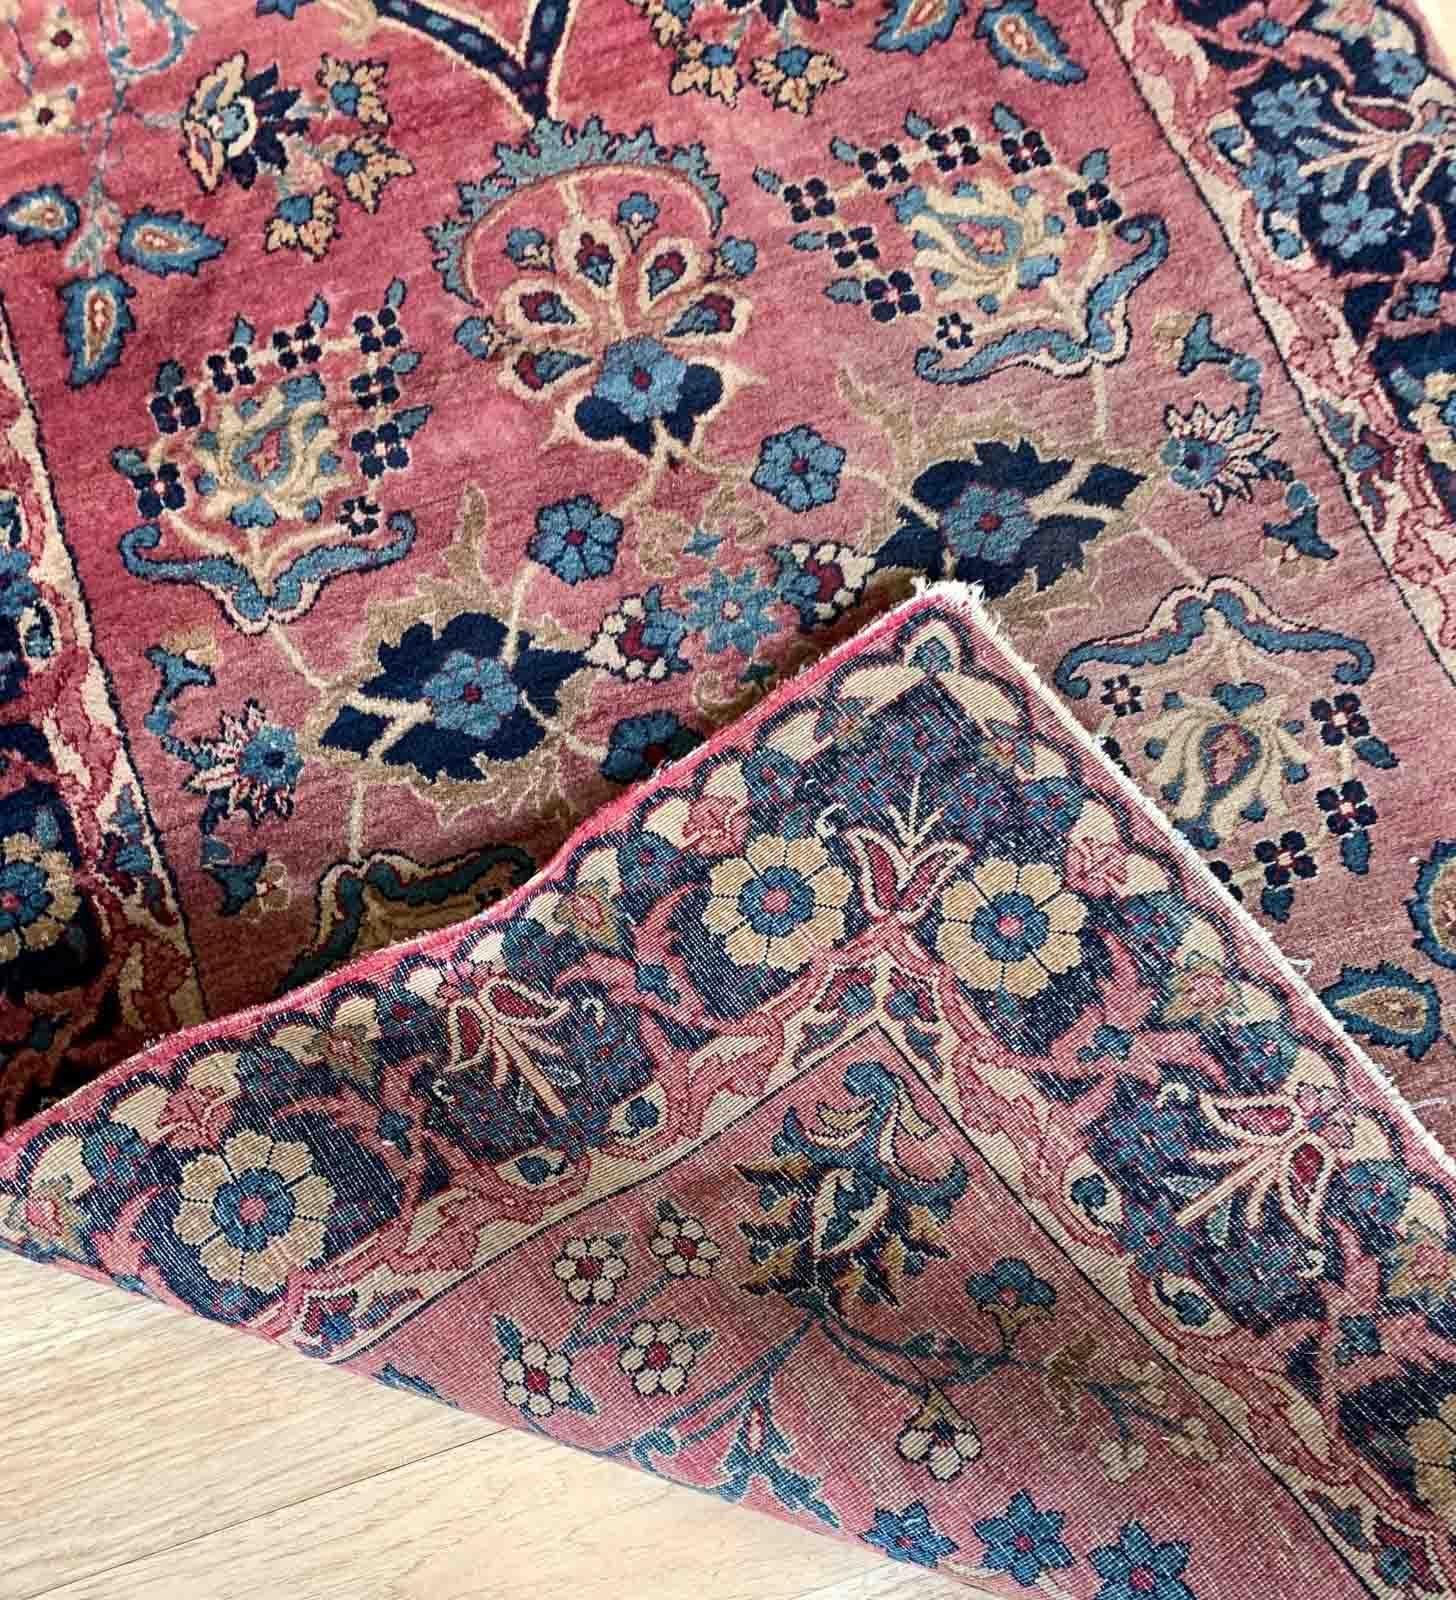 Handmade antique Middle Eastern rug in red and blue shades. The rug is from the beginning of 20th century in original good condition.

-condition: original good,

-circa: 1900s,

-size: 3.2' x 4.10' (97cm x 151cm),
?
-material: